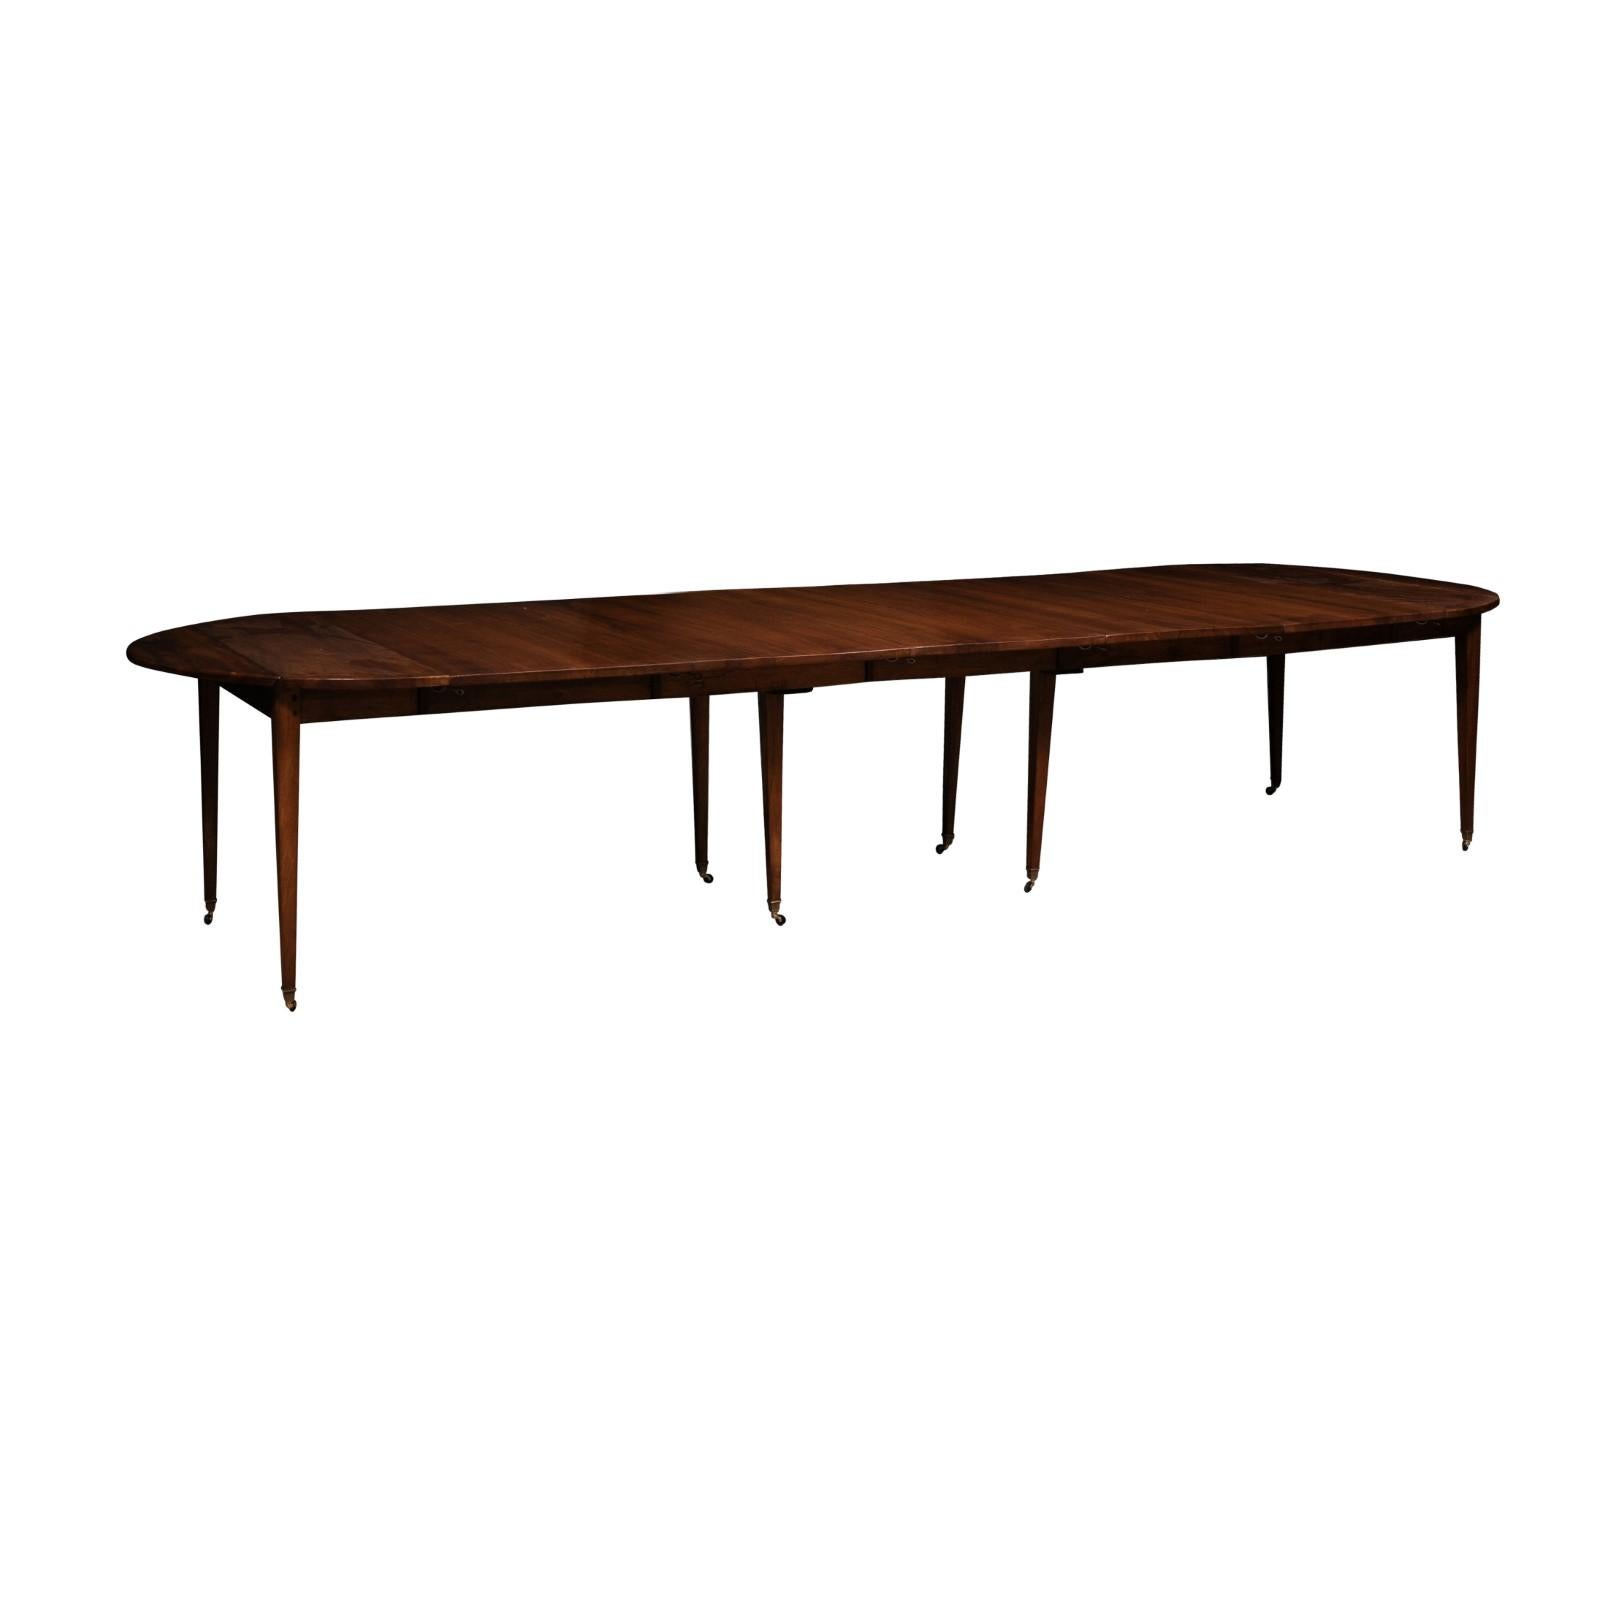 A French Turn of the Century walnut oval extension dining room table from circa 1900, with five leaves, tapered legs and casters. This exquisite French Turn of the Century walnut dining table, circa 1900, masterfully combines historical charm with